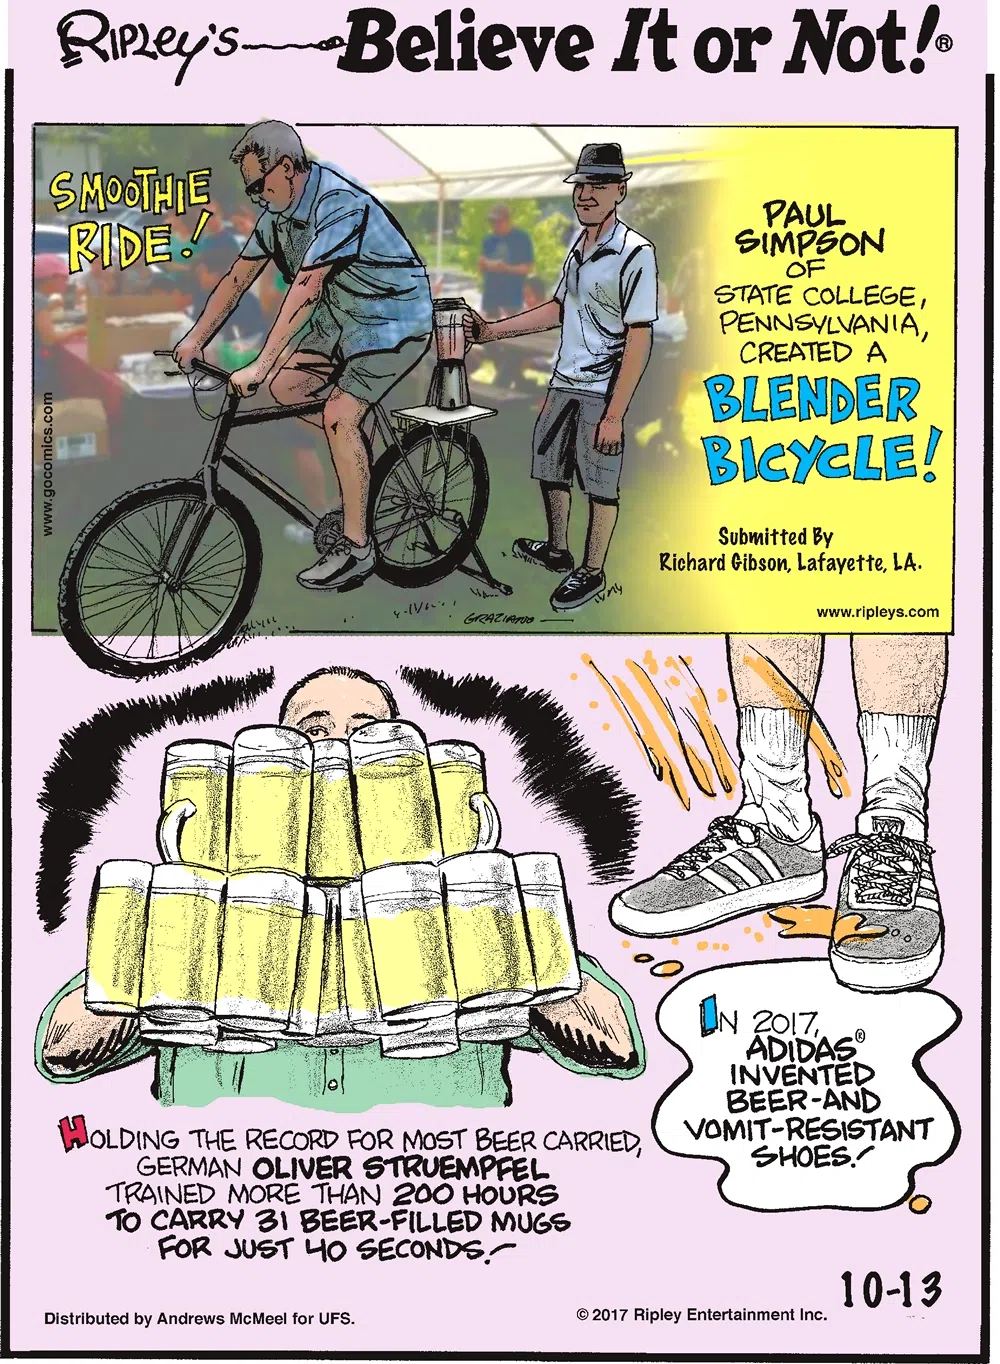 Paul Simpson of State College, Pennsylvania, created a blender bicycle! Submitted by Richard Gibson, Lafayette, LA.-------------------- Holding the record for most beer carried, German Oliver Struempfel trained more than 200 hours to carry 31 beer-filled mugs for just 40 seconds!-------------------- In 2017, Adidas invented beer-and-vomit-resistant shoes!